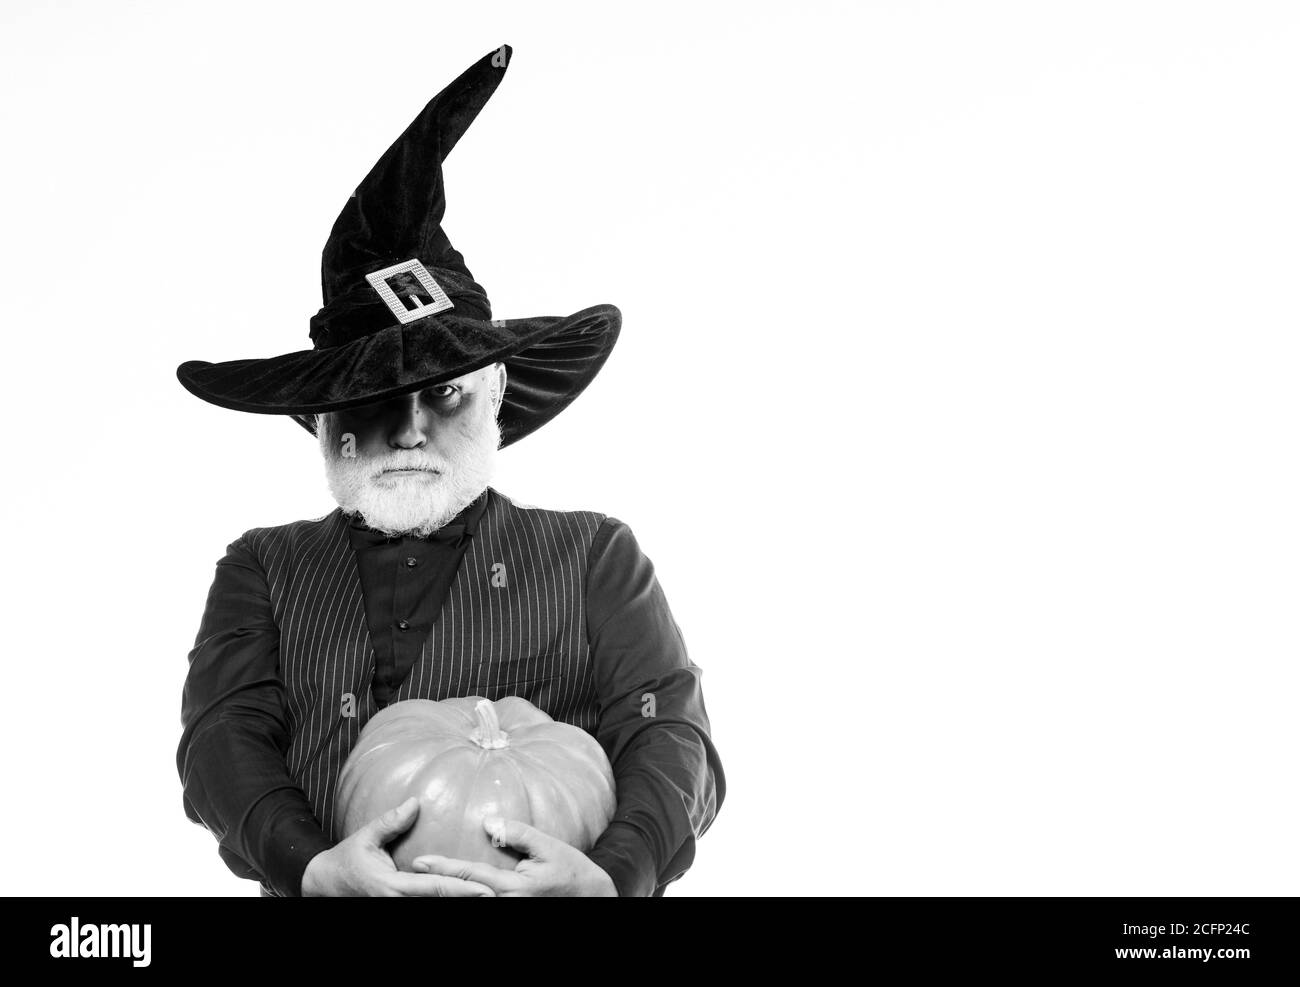 Magic concept. Experienced and wise. Halloween tradition. Wizard costume hat Halloween party. Magician witcher old man. Senior man white beard celebrate Halloween with pumpkin. Cosplay outfit. Stock Photo